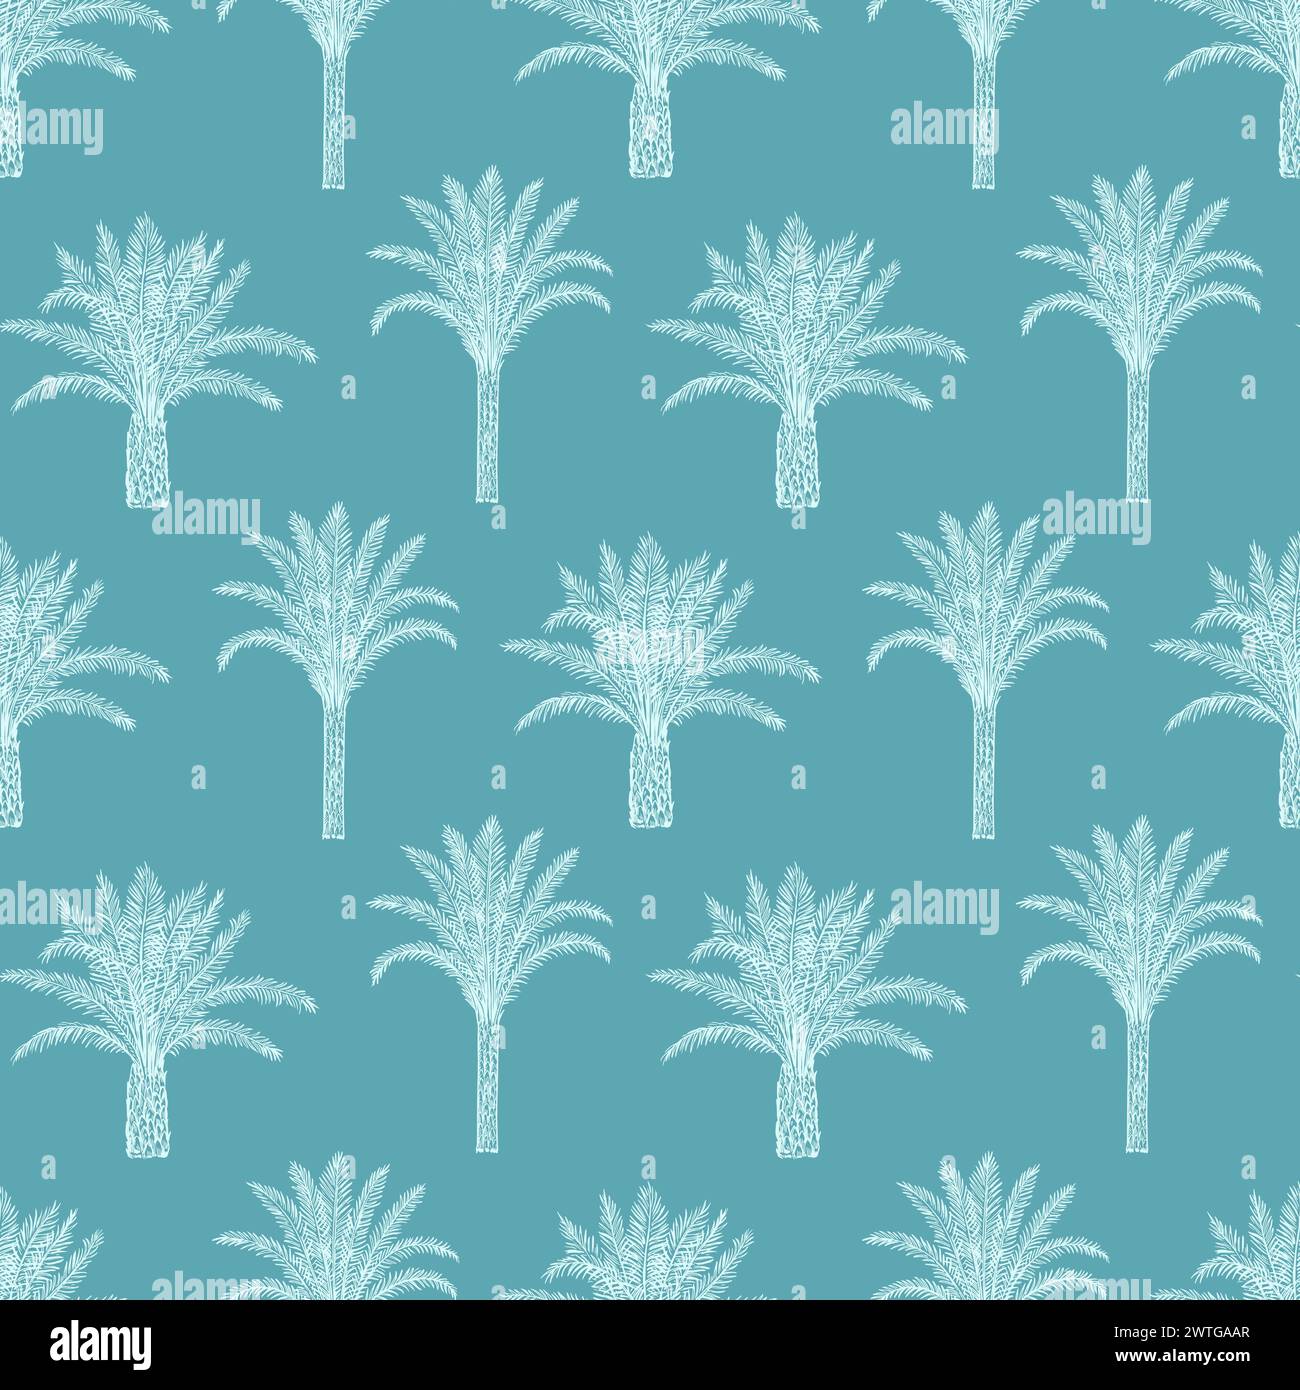 Seamless pattern with palm trees trees and leaves. Toile de Jouy retro engraving style. Stock Vector